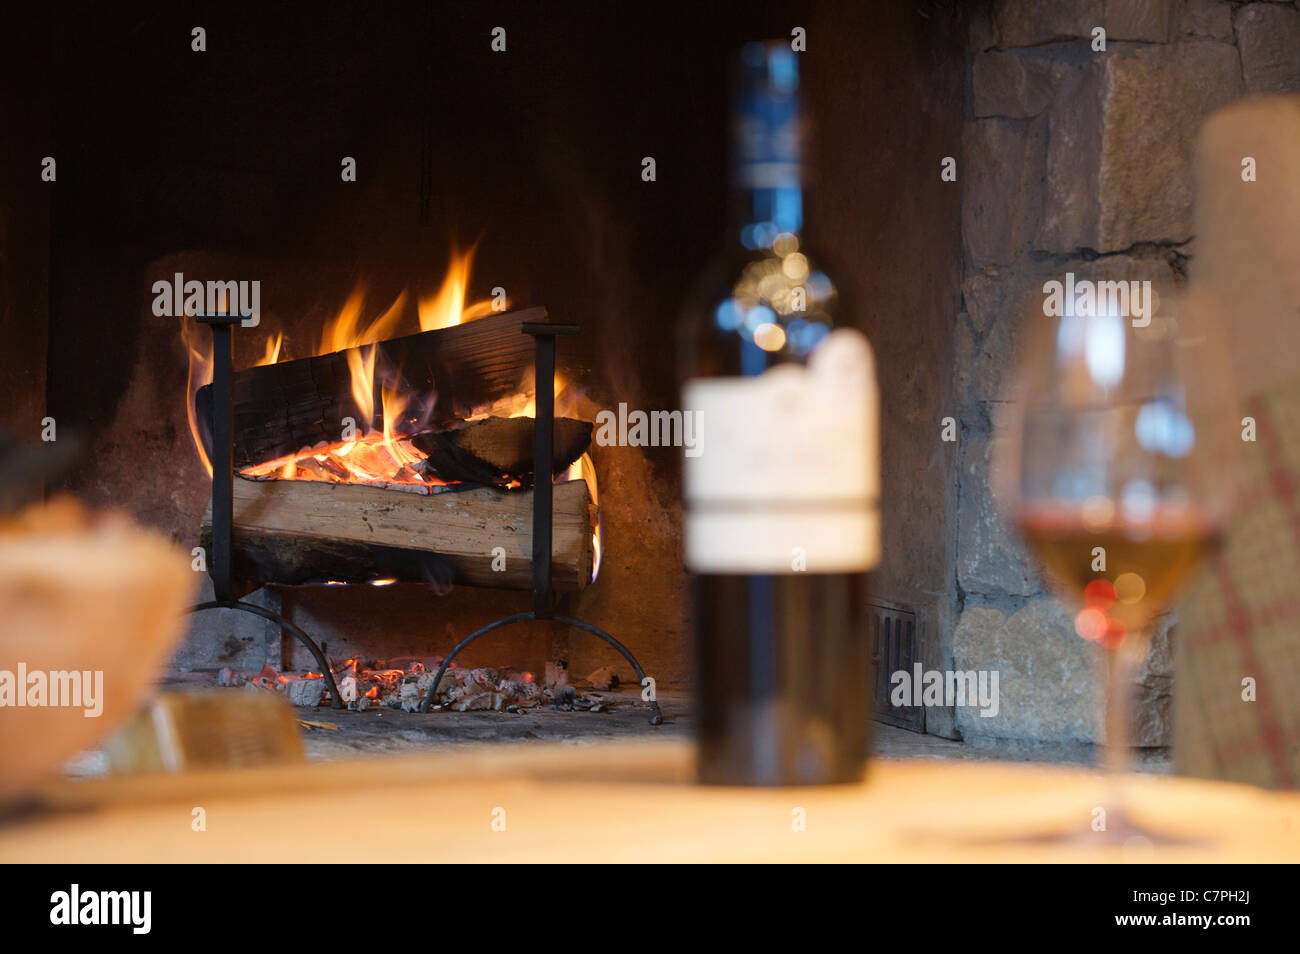 Glass of wine and bottle by fireplace Stock Photo